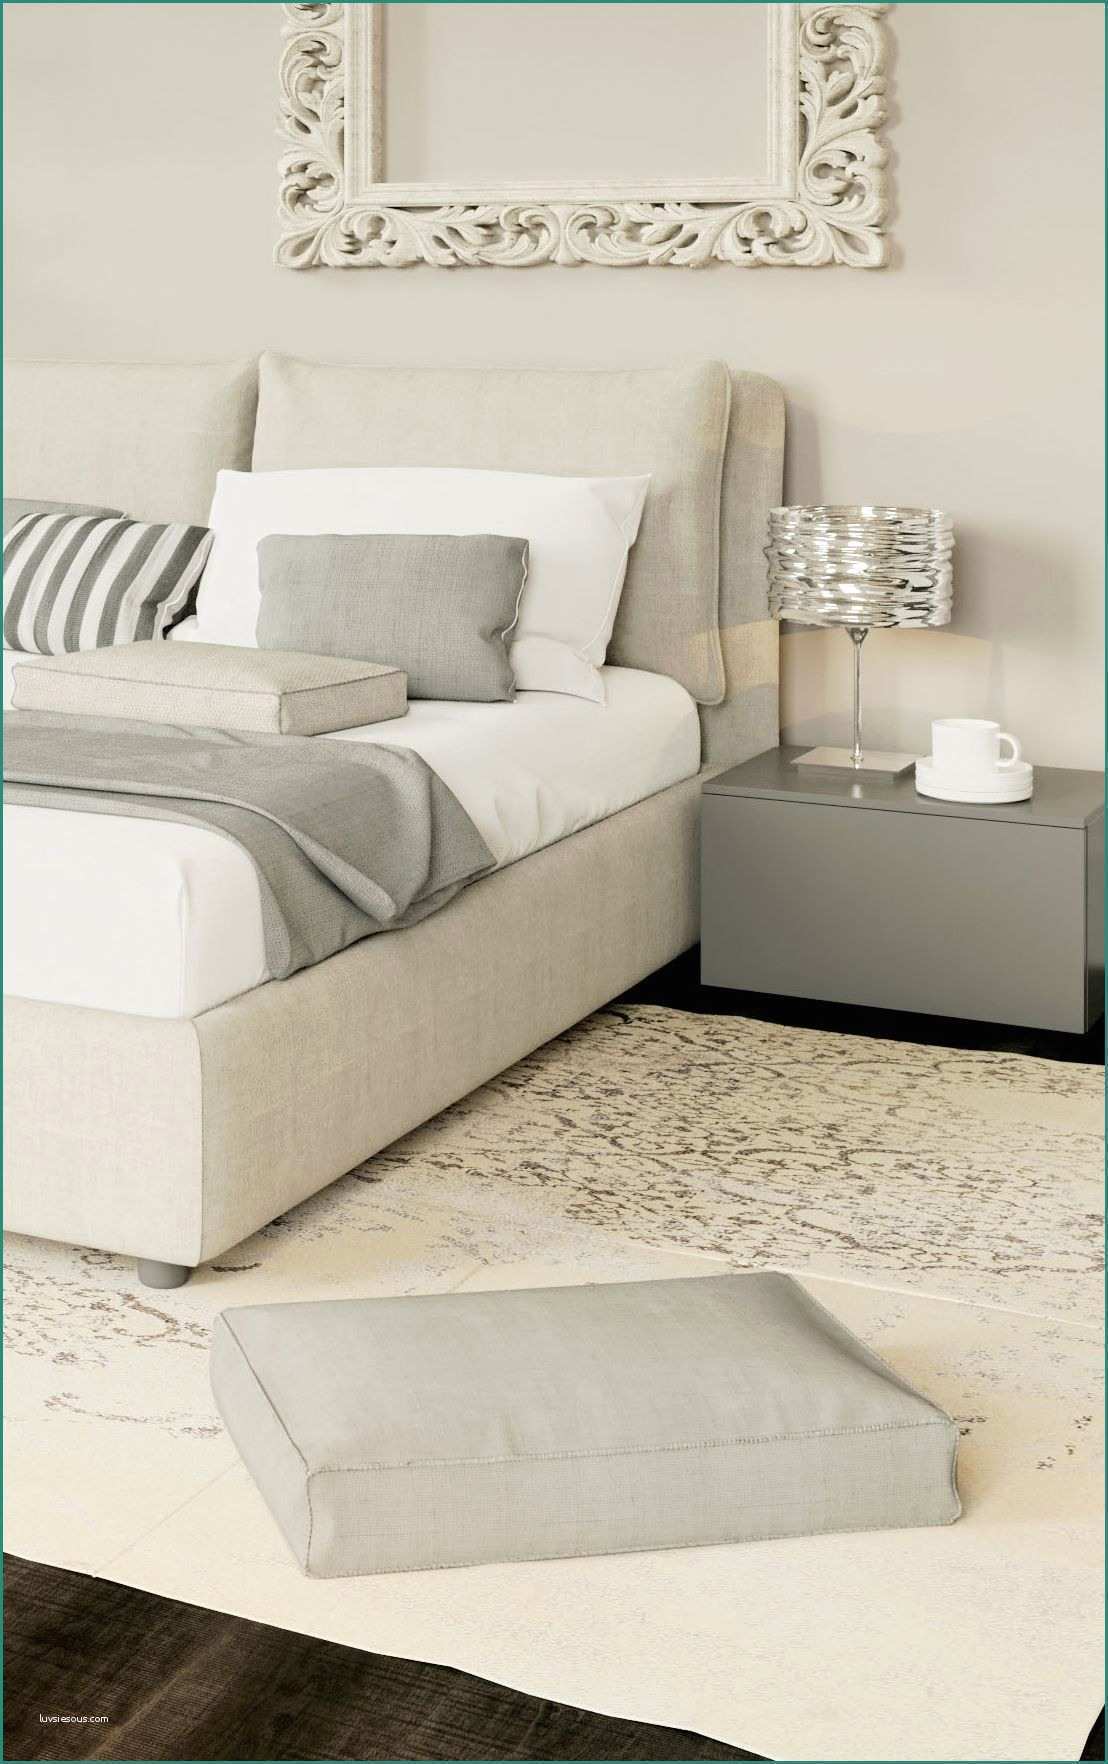 Letto Matrimoniale Shabby Chic E Luxury Details Grey and White Lacasamoderna Beds Sweetdreams